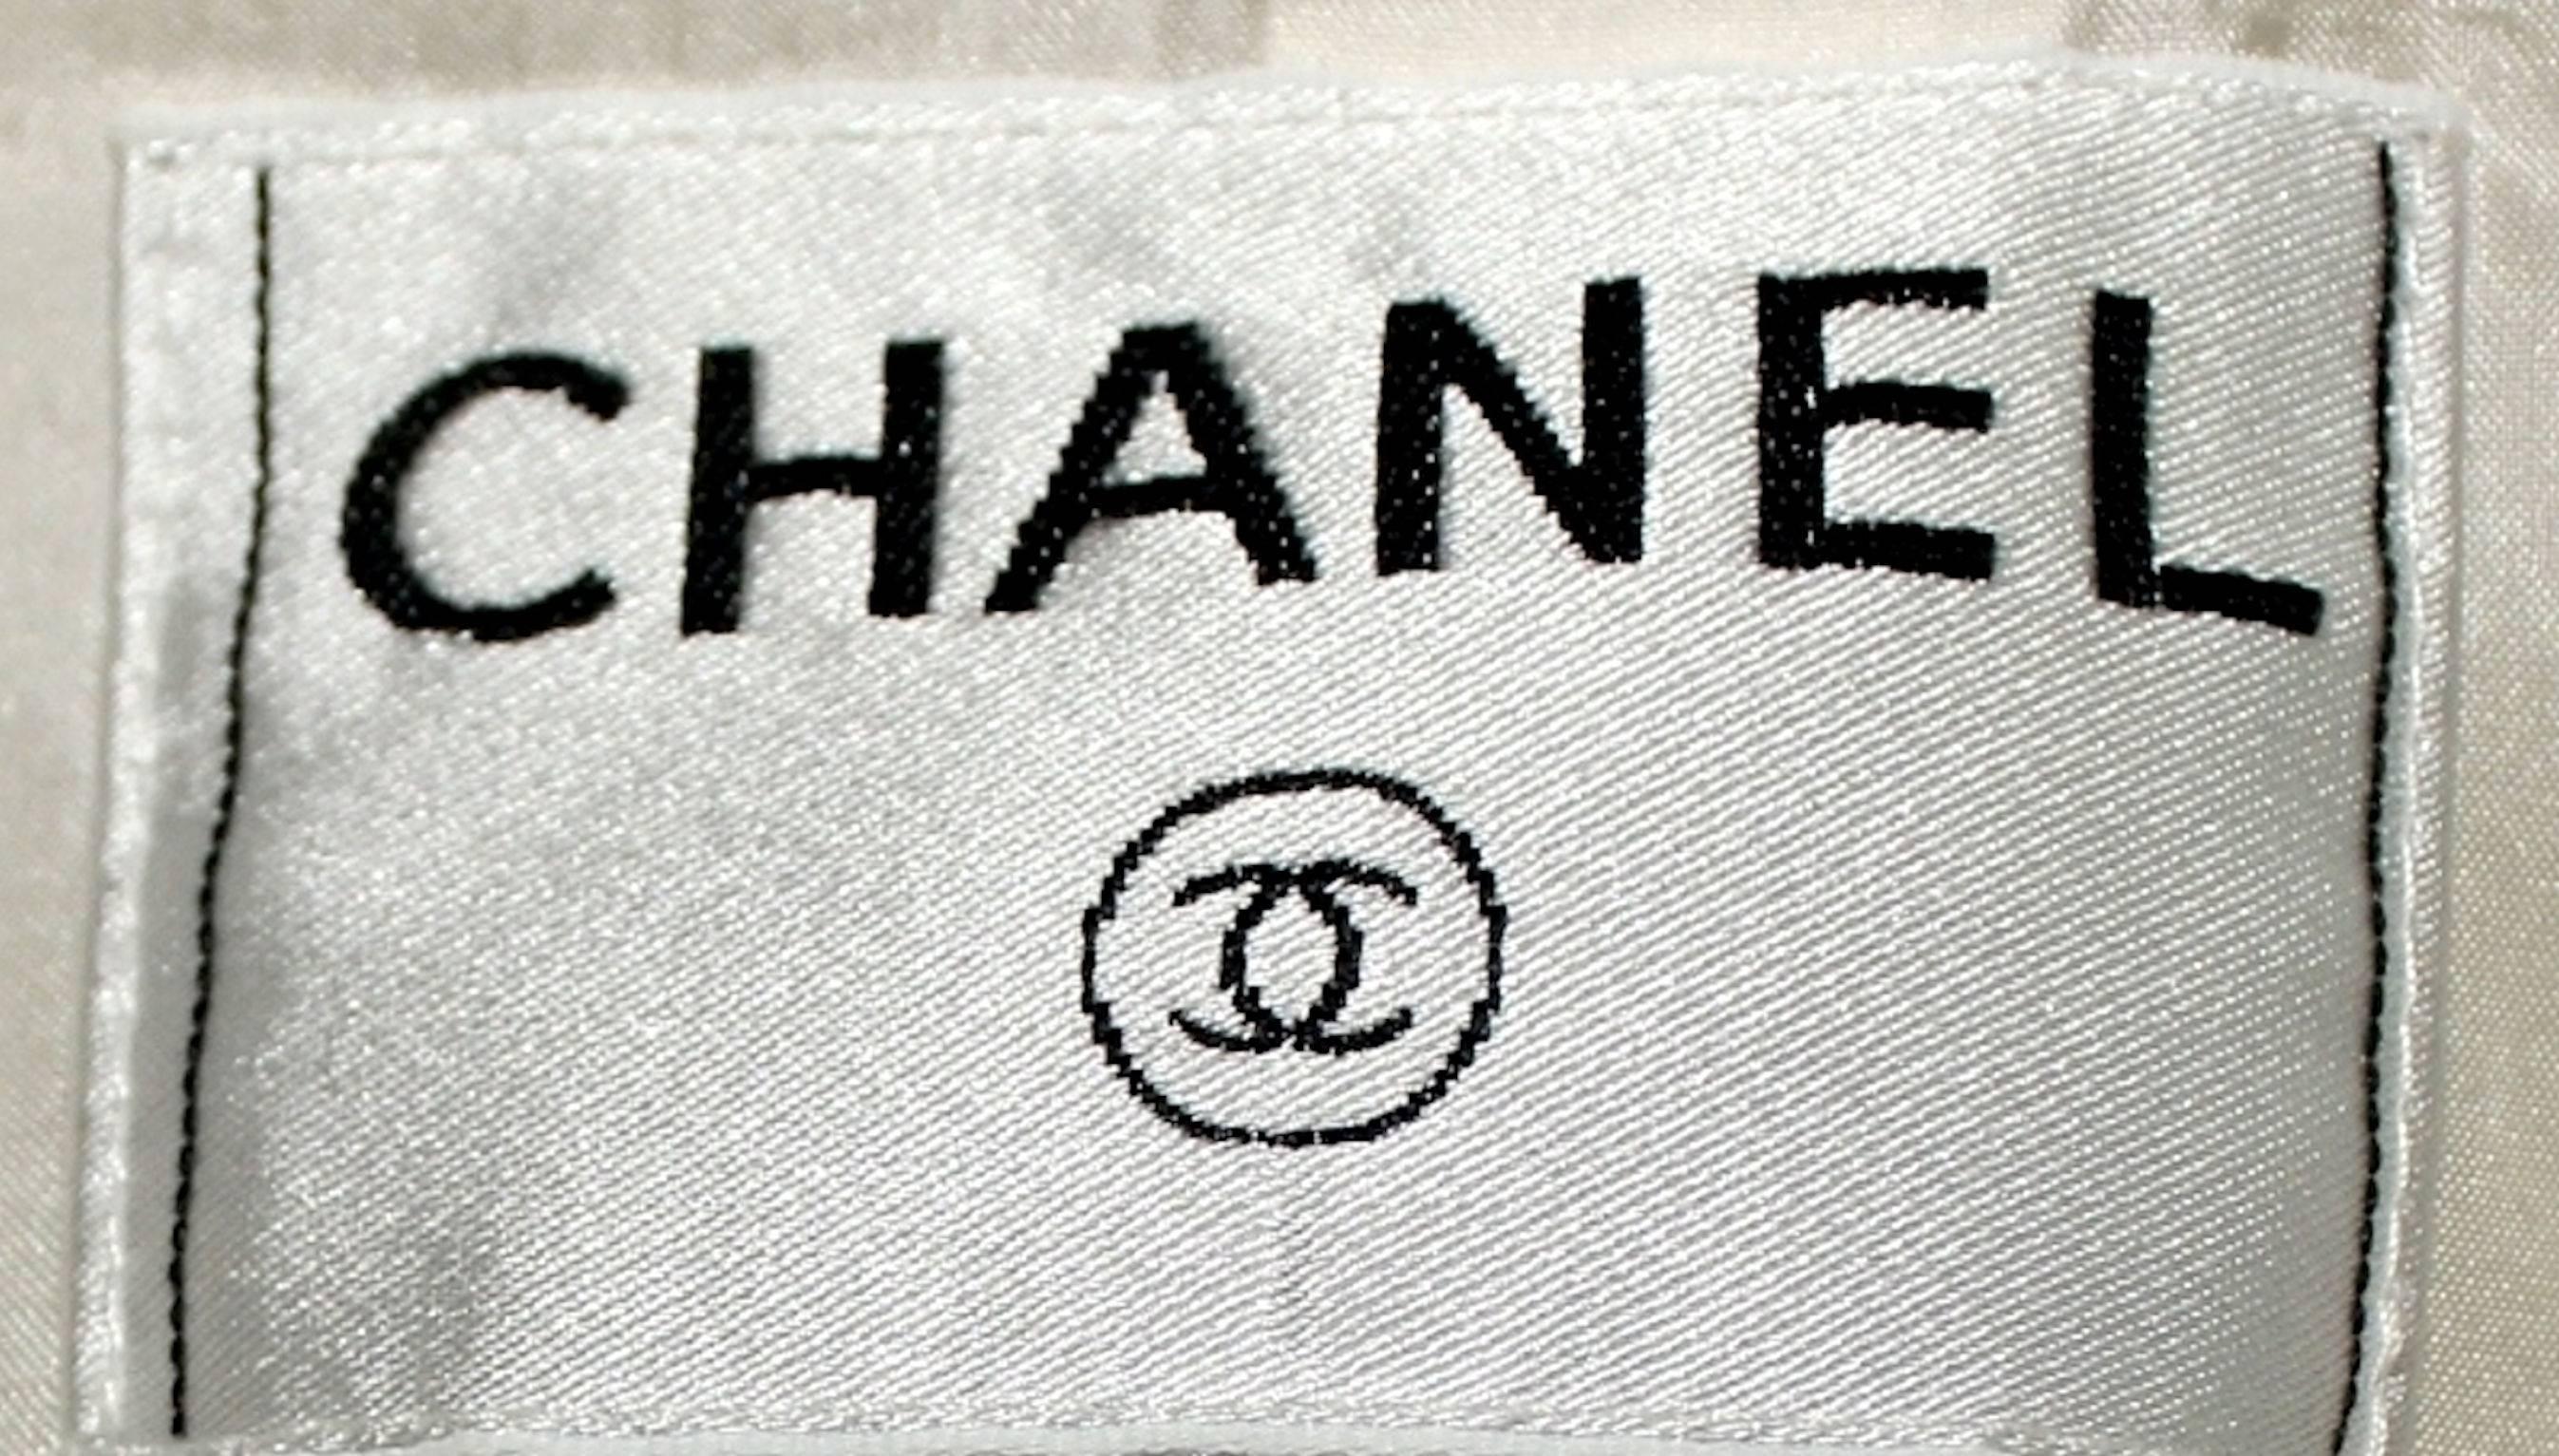 NEW Chanel Signature Tweed White and Black Coat with 